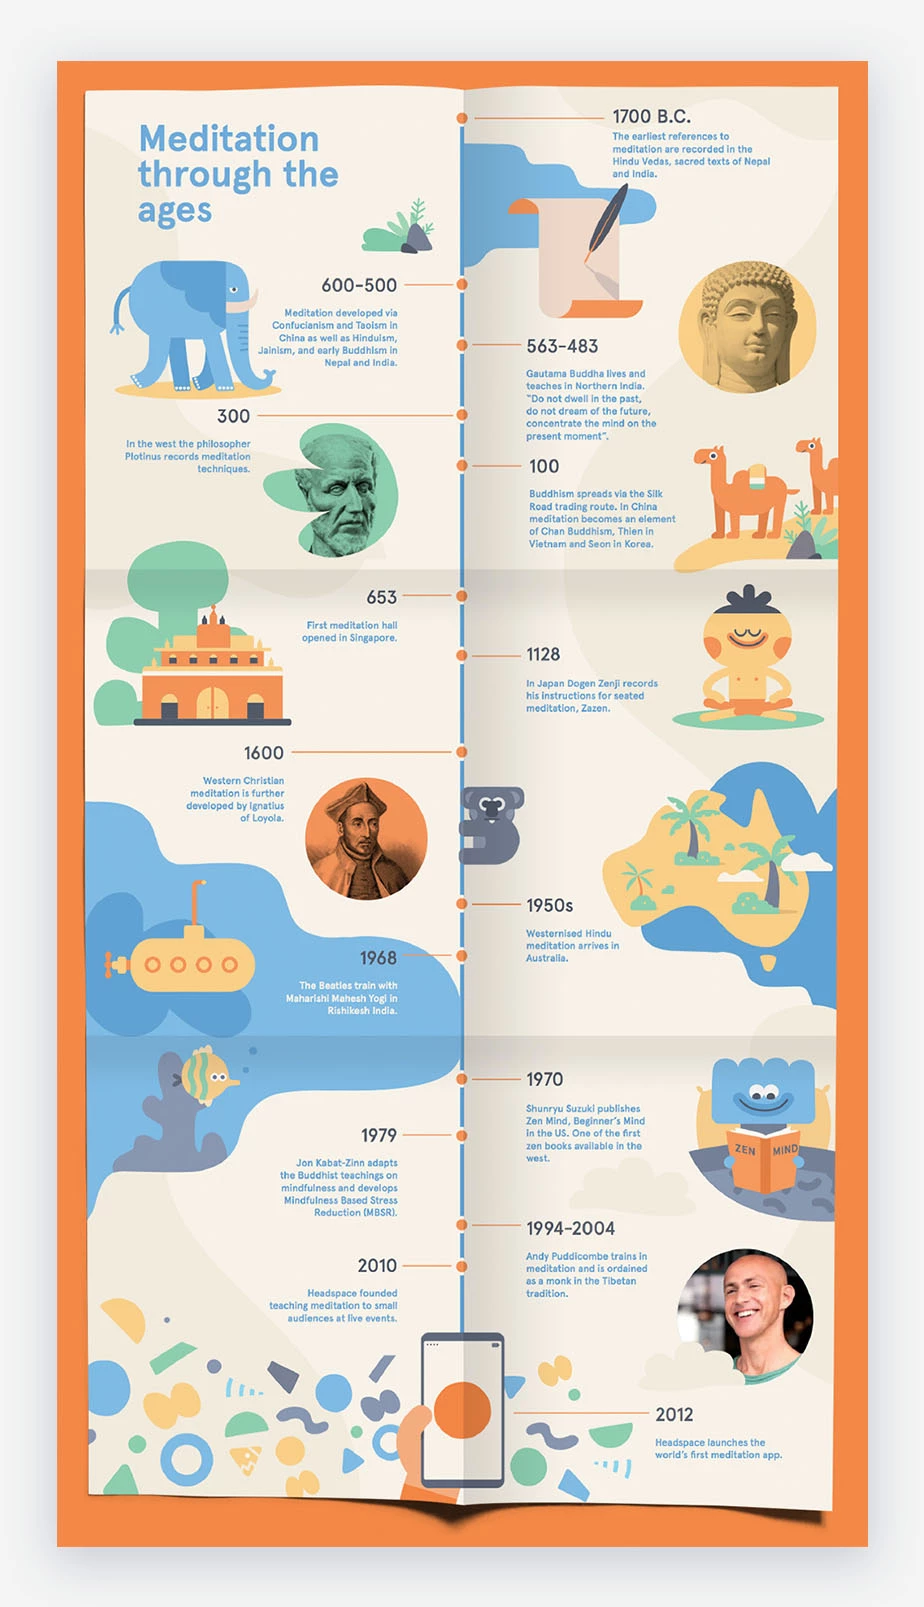 8 Best Types of Infographics and When to Use Them